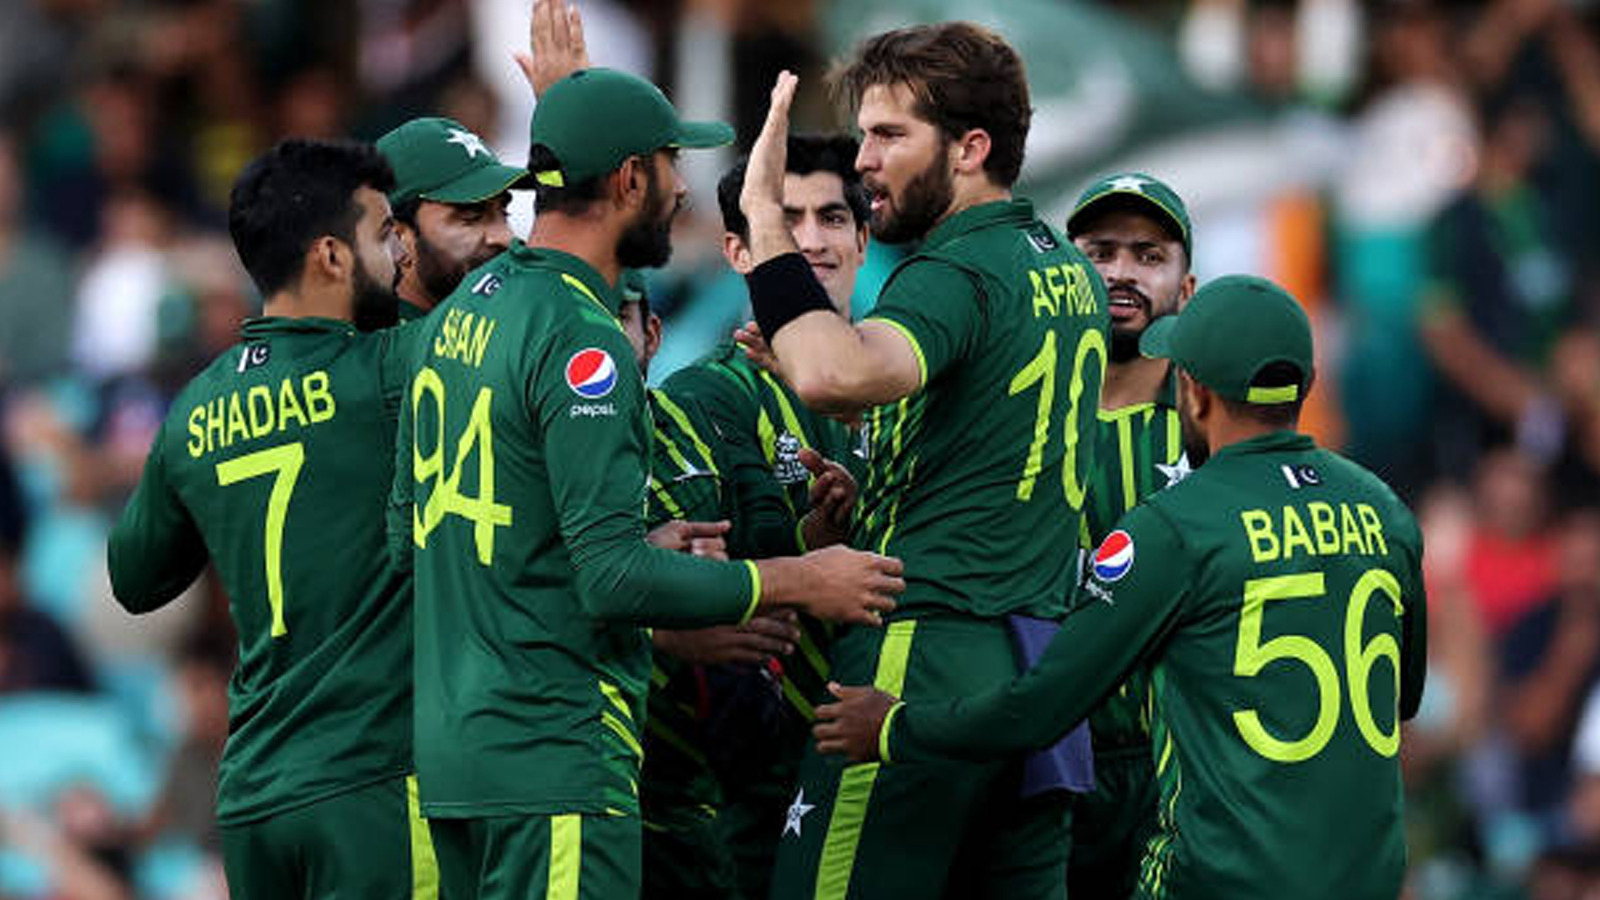 Team Pakistan | image: gettyimages